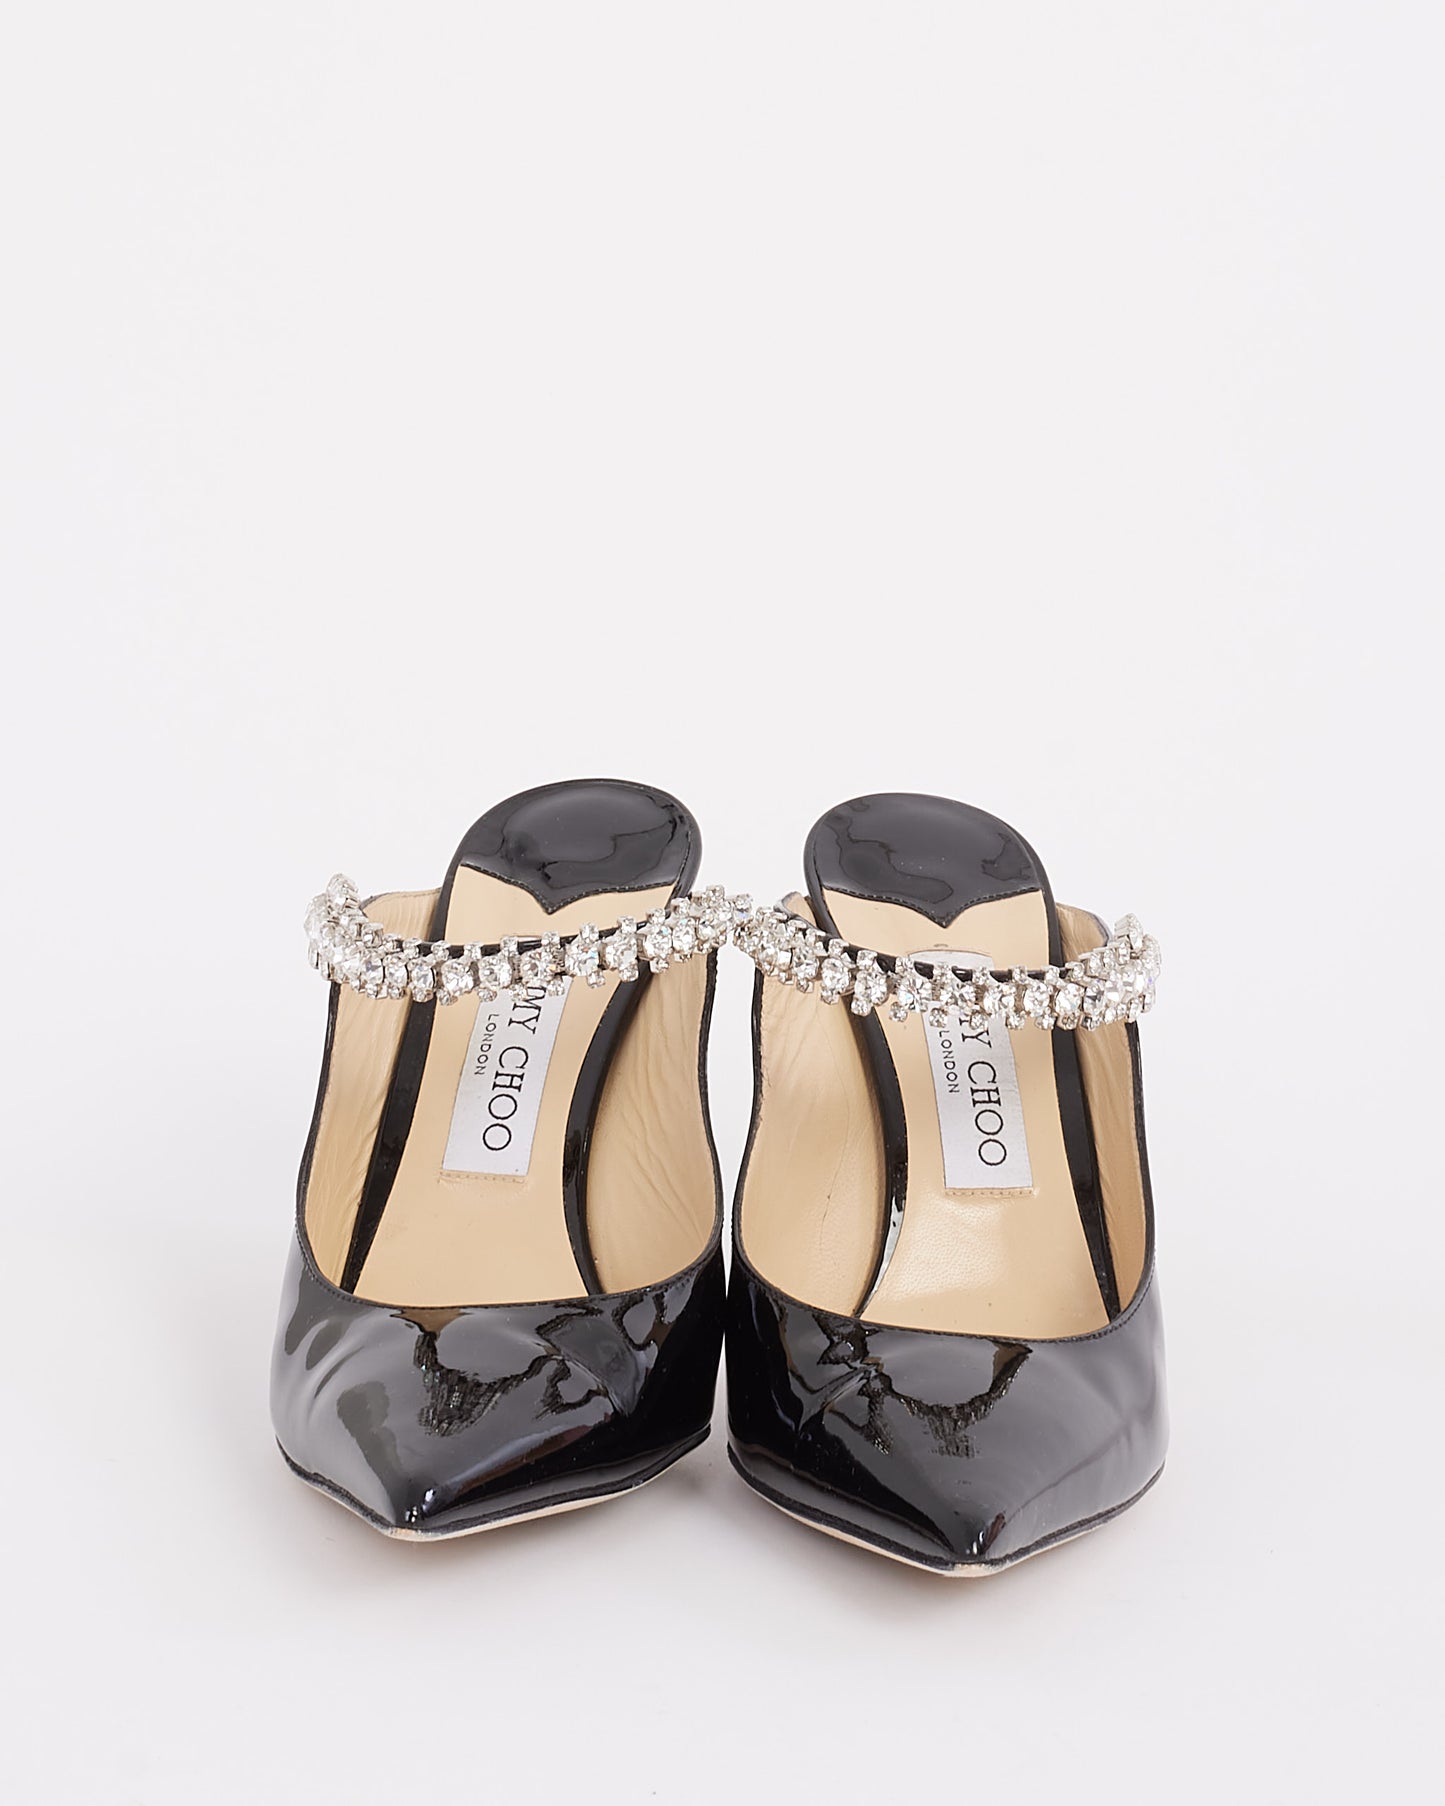 Jimmy Choo Black Patent Leather Crystal Embellished Mules - 38.5